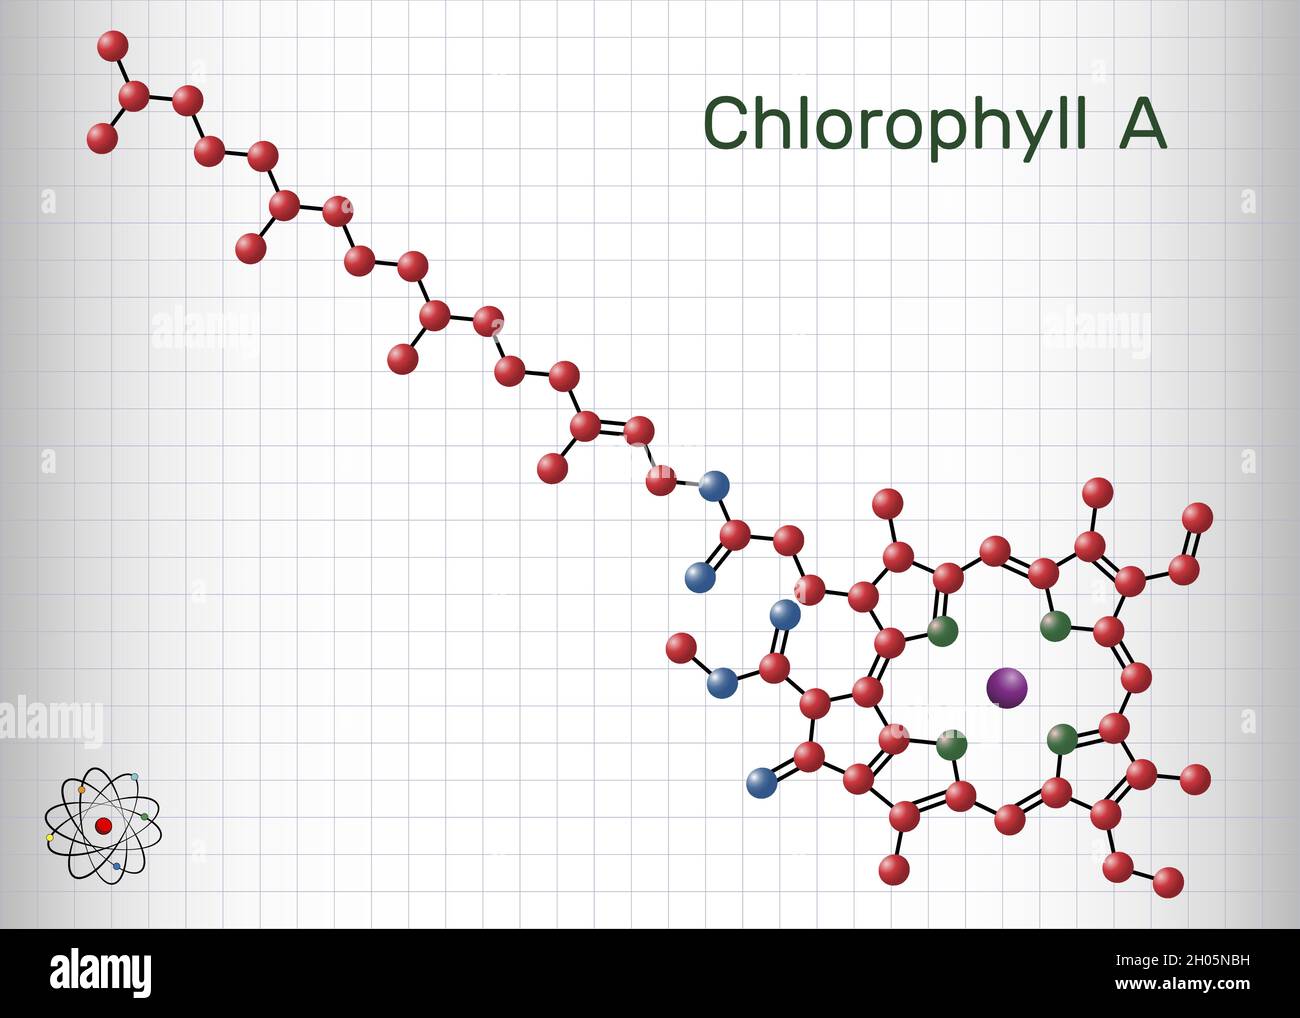 Chlorophyll A, chlorophyll molecule. It is photosynthetic pigment used in oxygenic photosynthesis. Sheet of paper in a cage Stock Vector